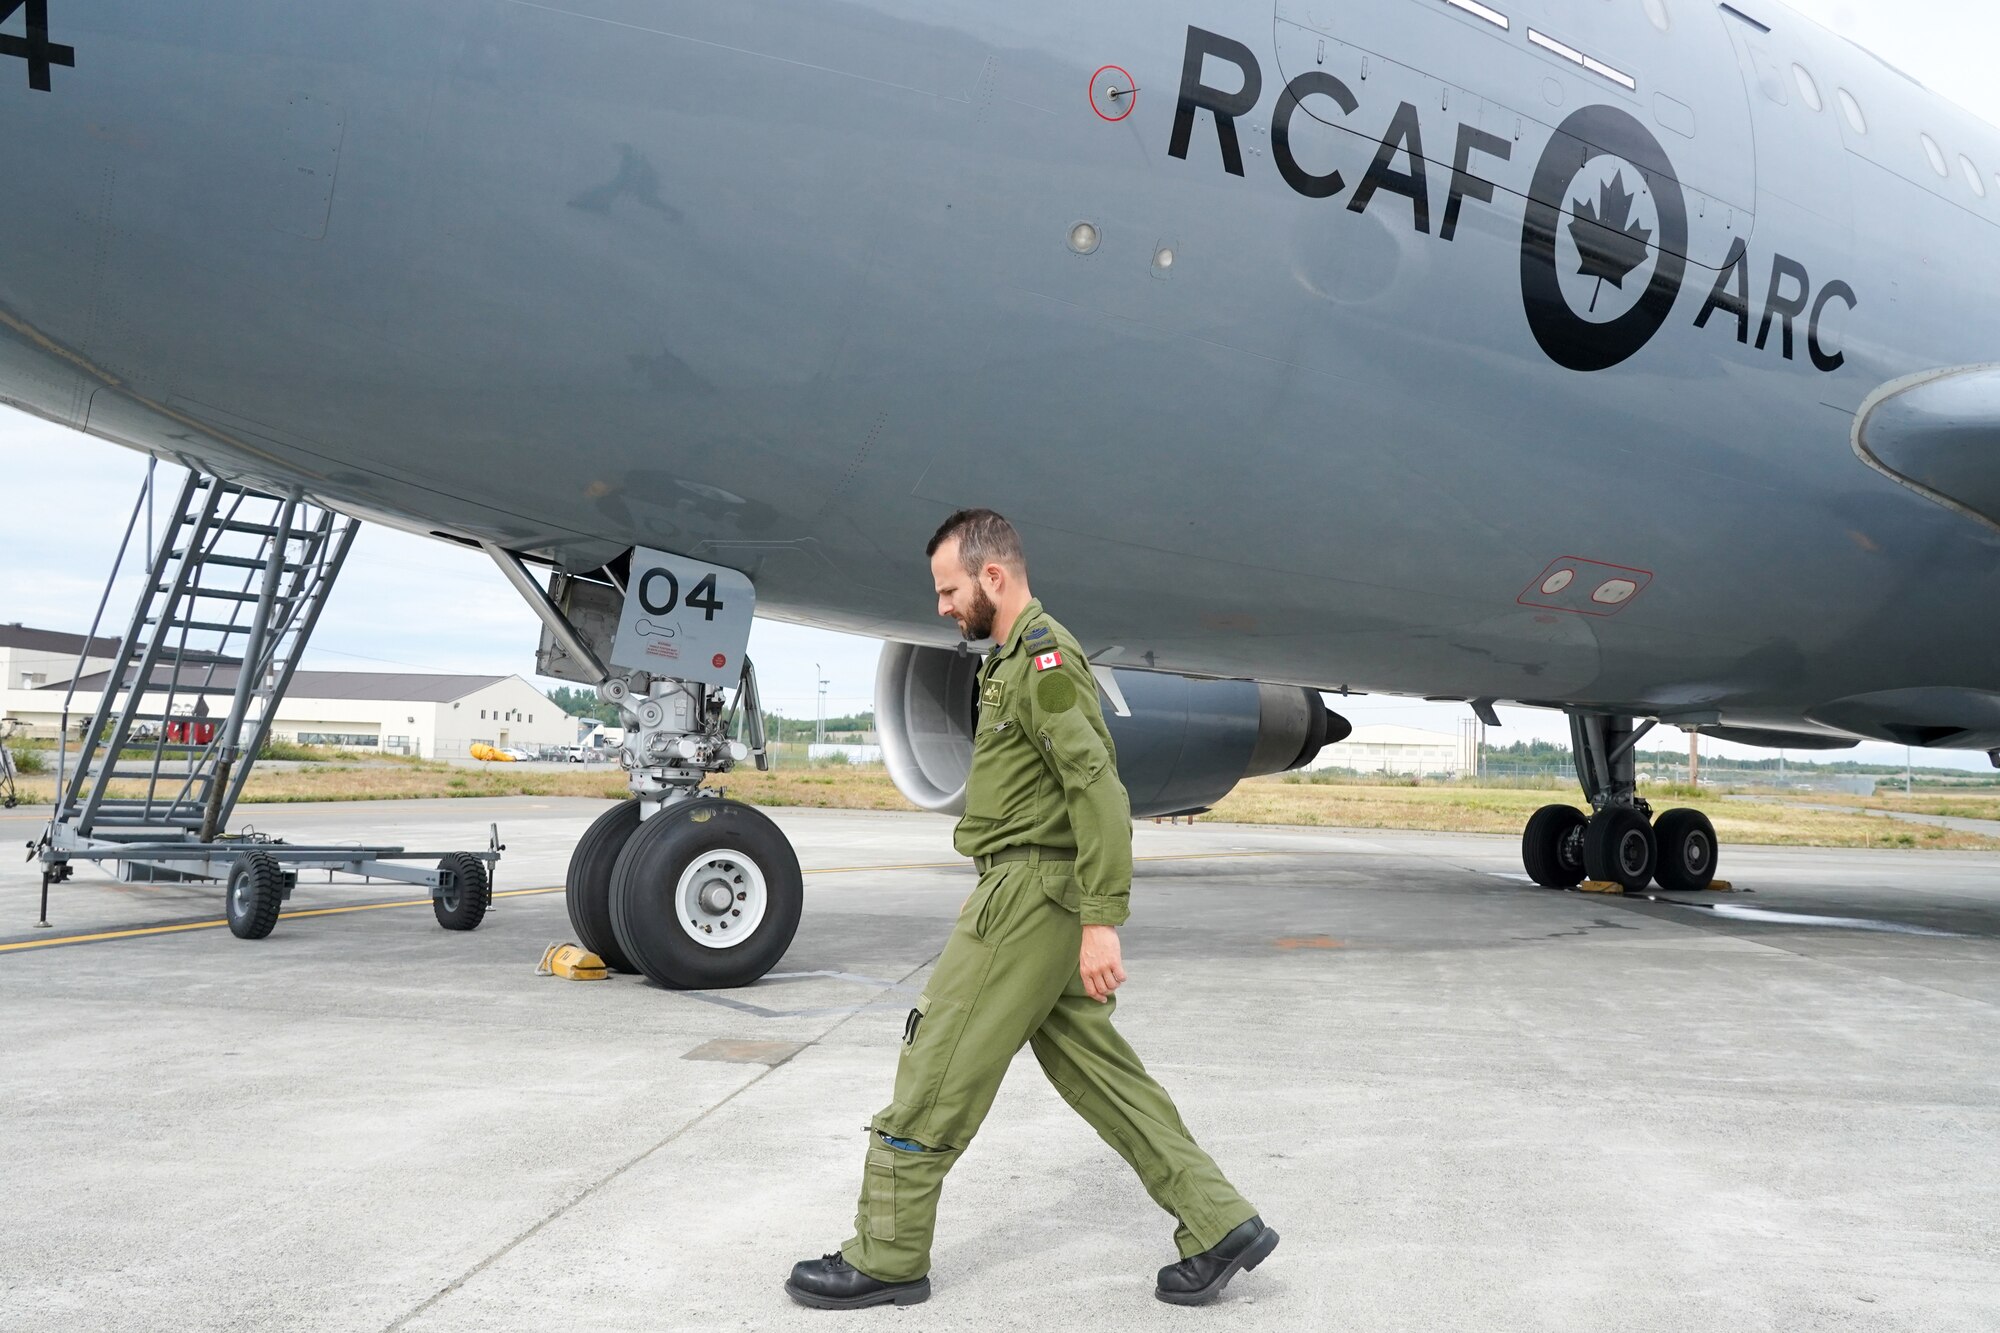 Royal Canadian Air Force Sgt. Oliver Beaudry, a loadmaster assigned to the 437th Transport Squadron based out of Canadian Forces Base Trenton, Canada, performs pre-flight checks before refueling operations in training airspace over Alaska during the Red Flag-Alaska 19-3 exercise, Aug. 15, 2019. Red Flag-Alaska, a series of Pacific Air Forces commander-directed field training exercises for U.S. forces, provides joint offensive counter-air, interdiction, close air support, and large force employment training in a simulated combat environment.